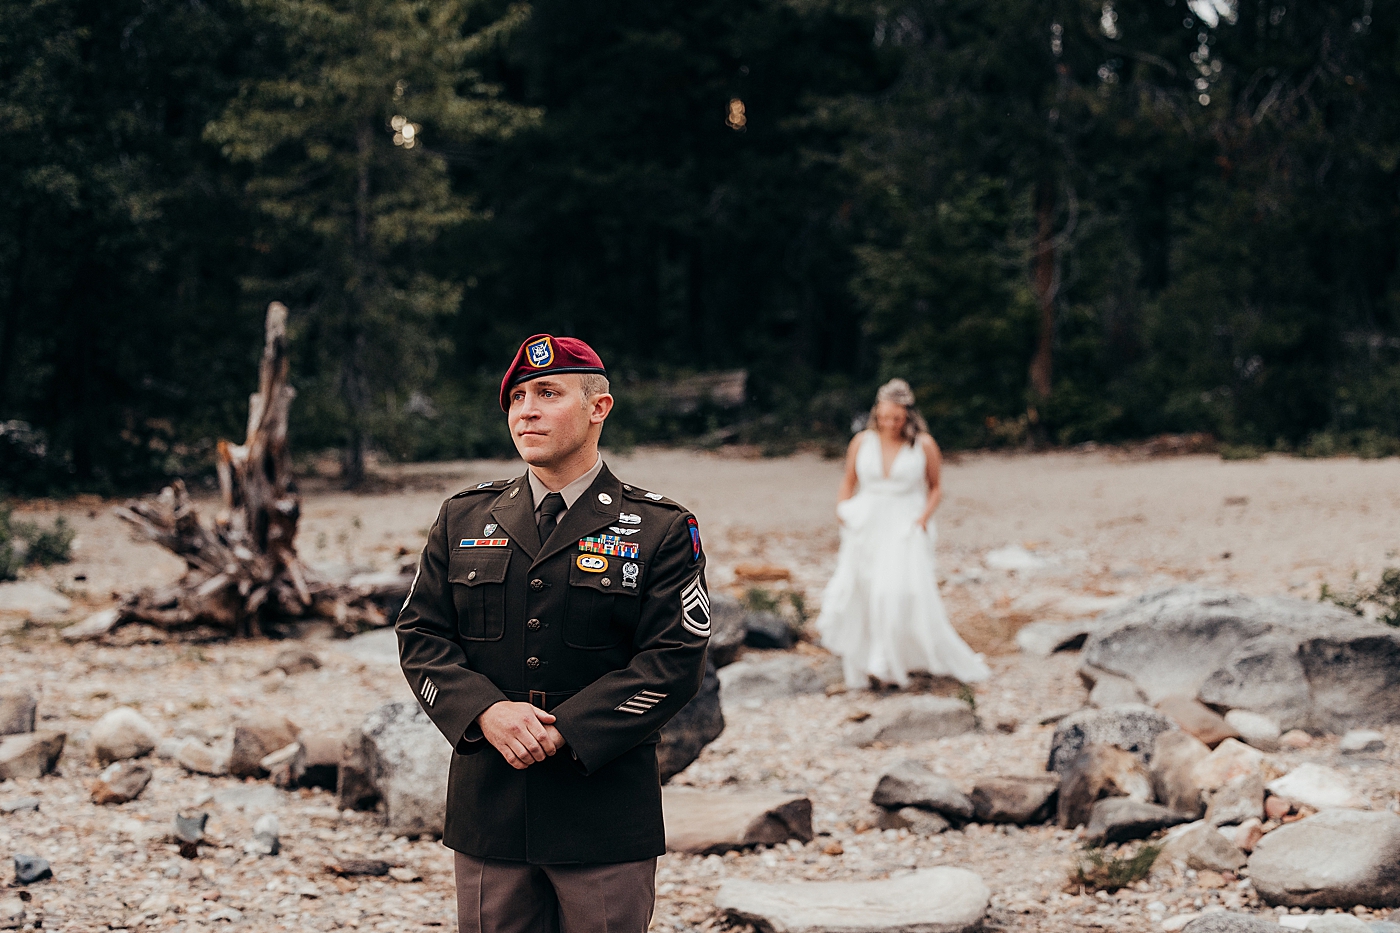 First look during intimate military elopement at Lake Wenatchee. Photo by Megan Montalvo Photography.